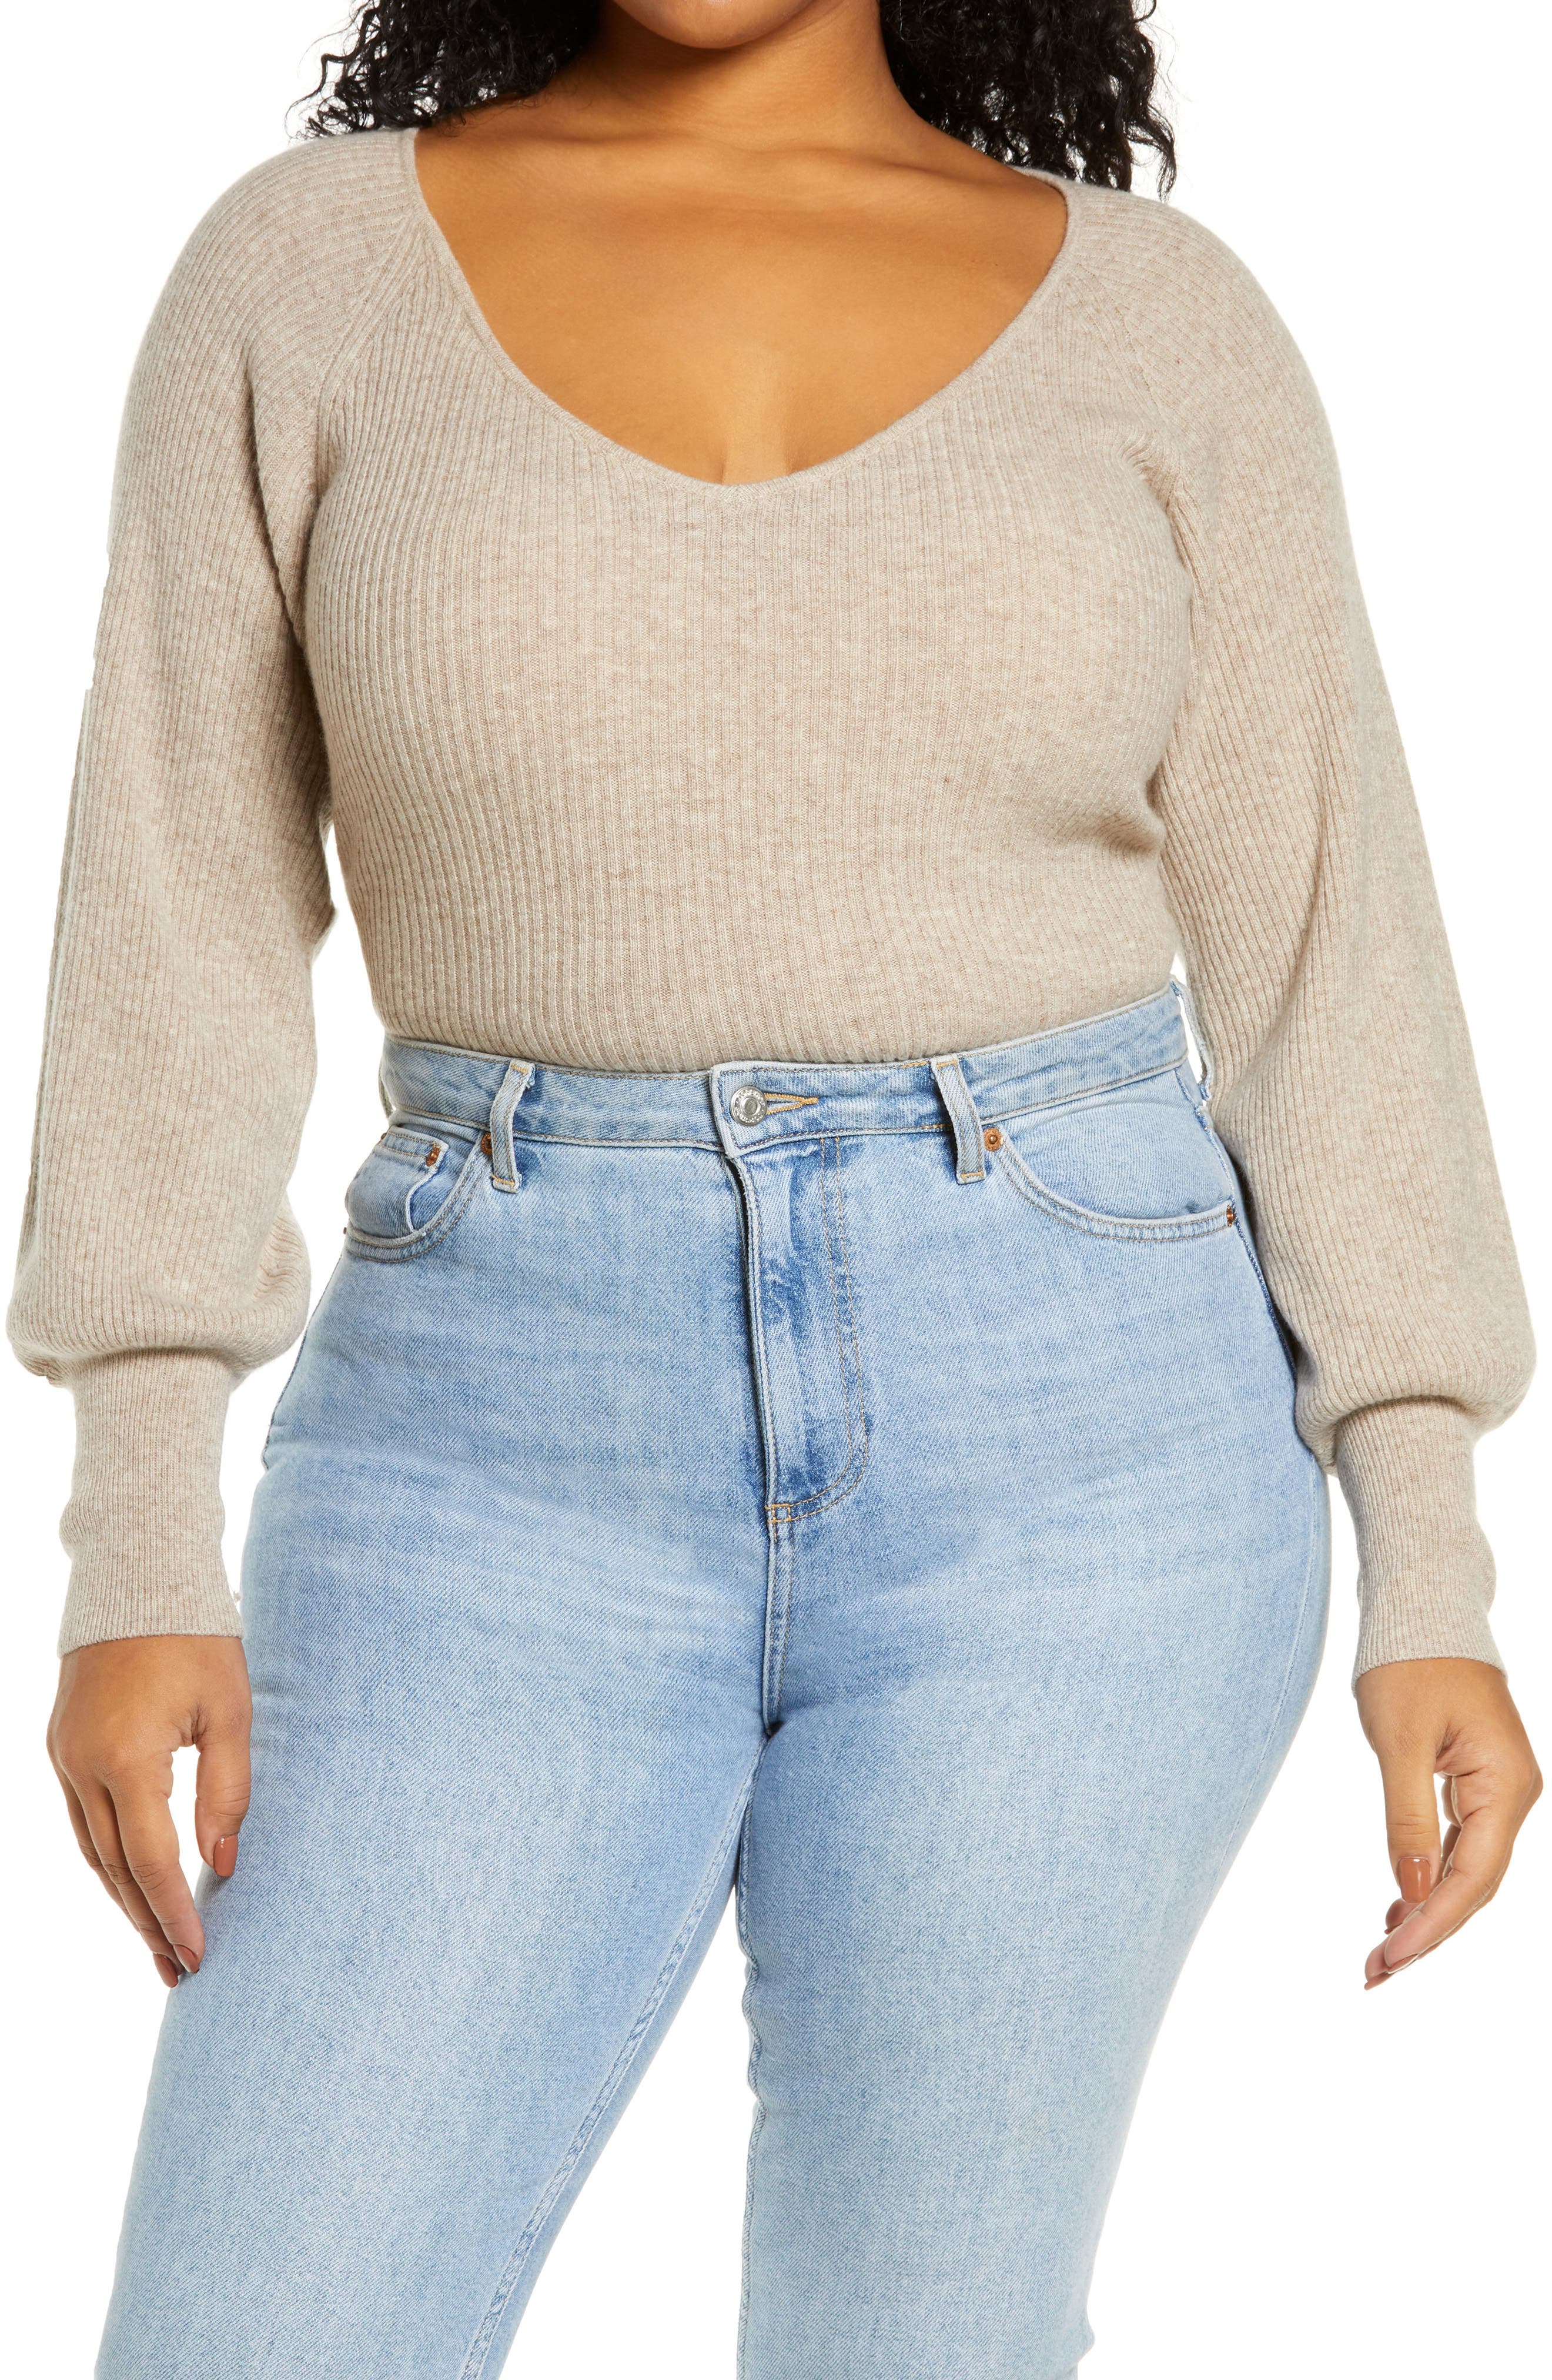 Reformation Hart V-Neck Ribbed Cashmere Sweater in Oatmeal at Nordstrom, Size 2X